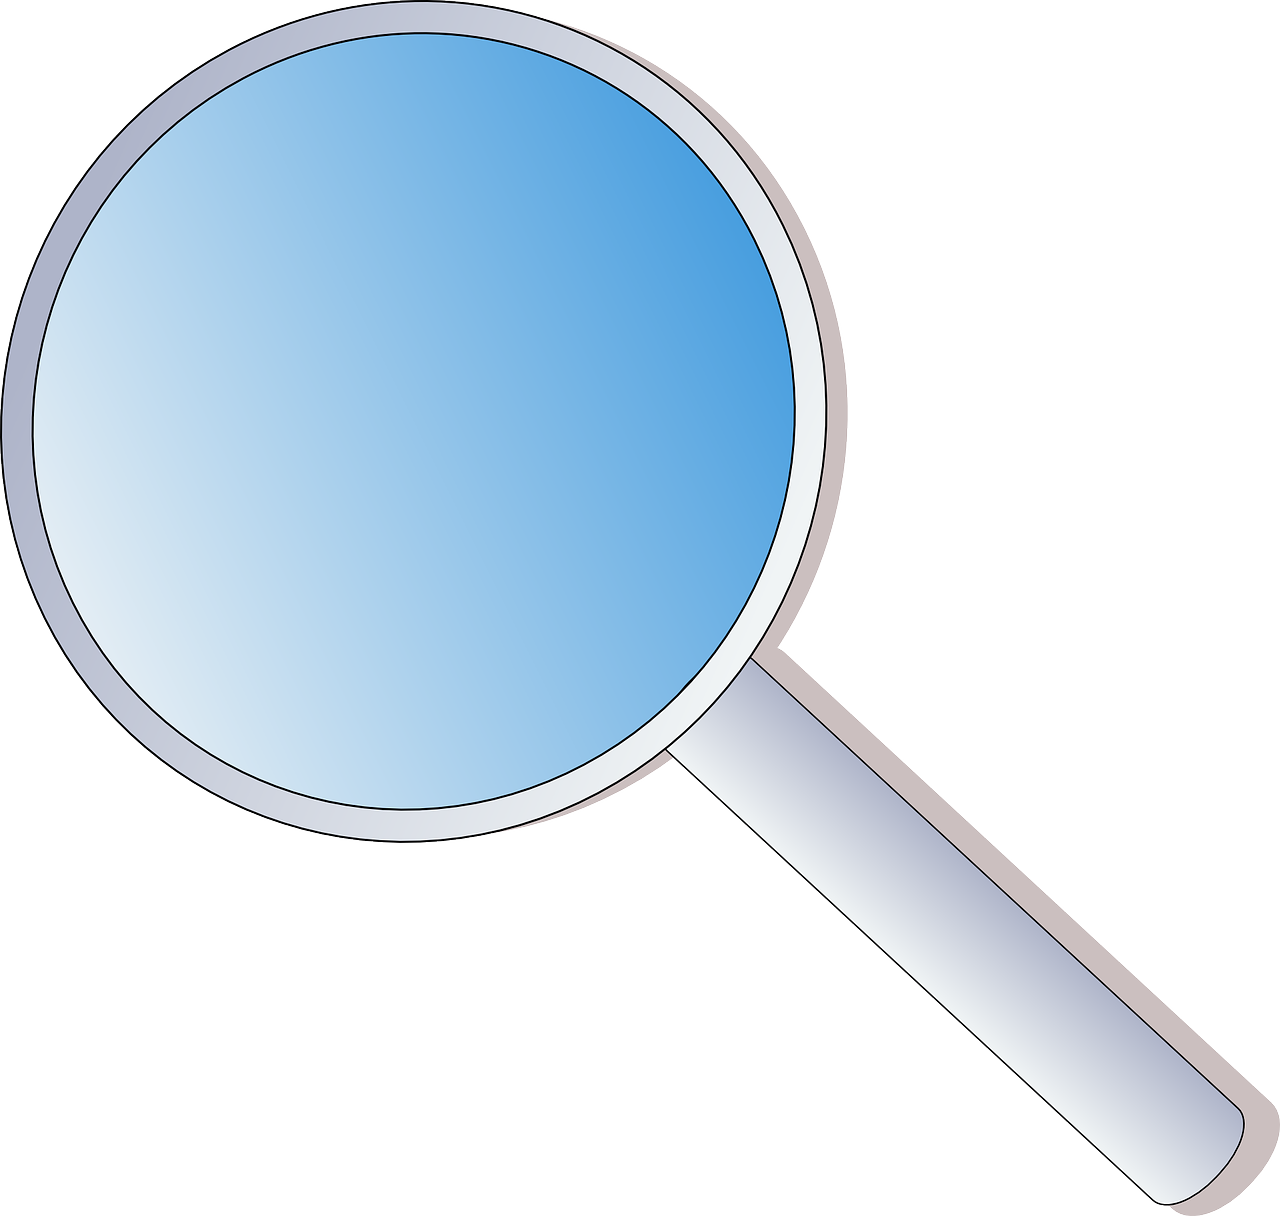 magnifying lens, glass, office